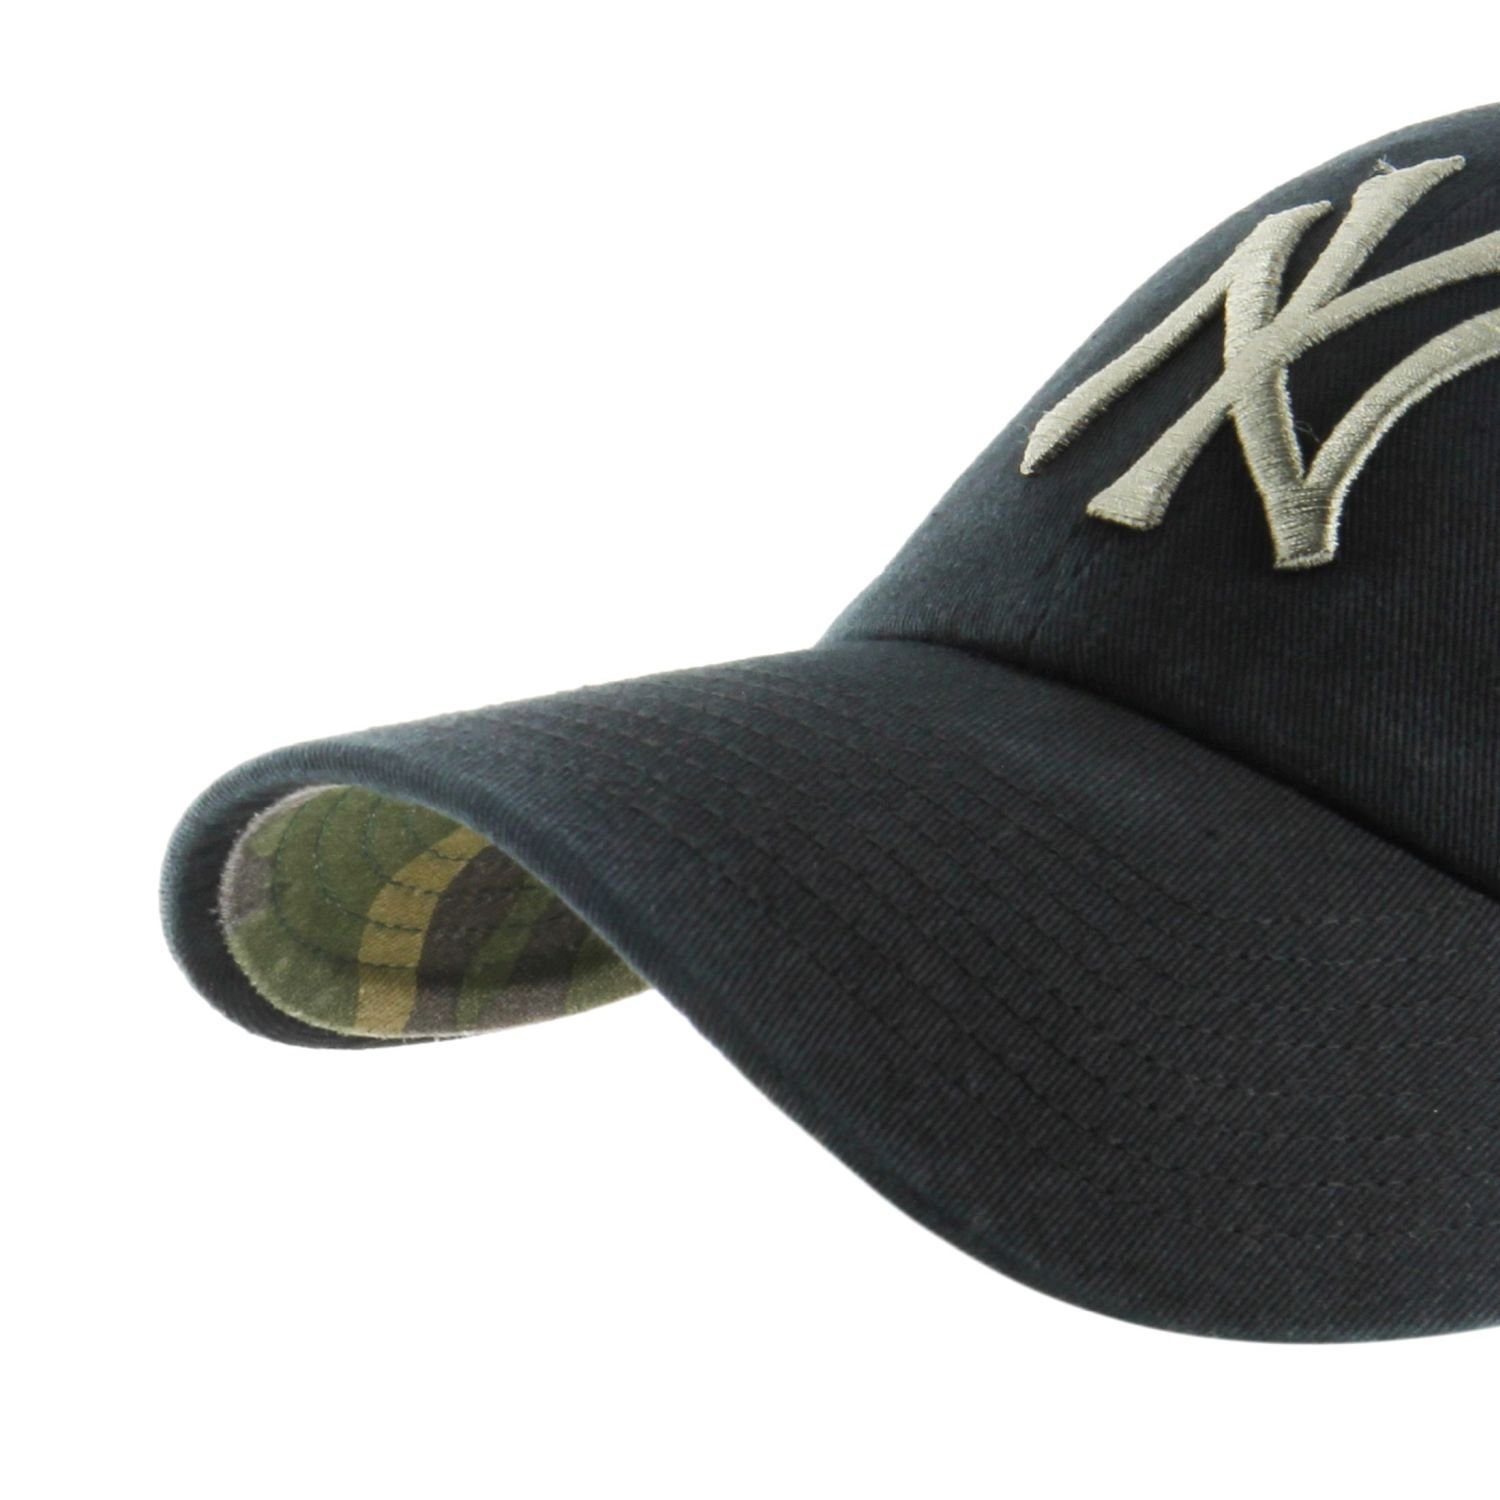 York UP Fit Brand Cap Relaxed Trucker CLEAN Yankees New '47